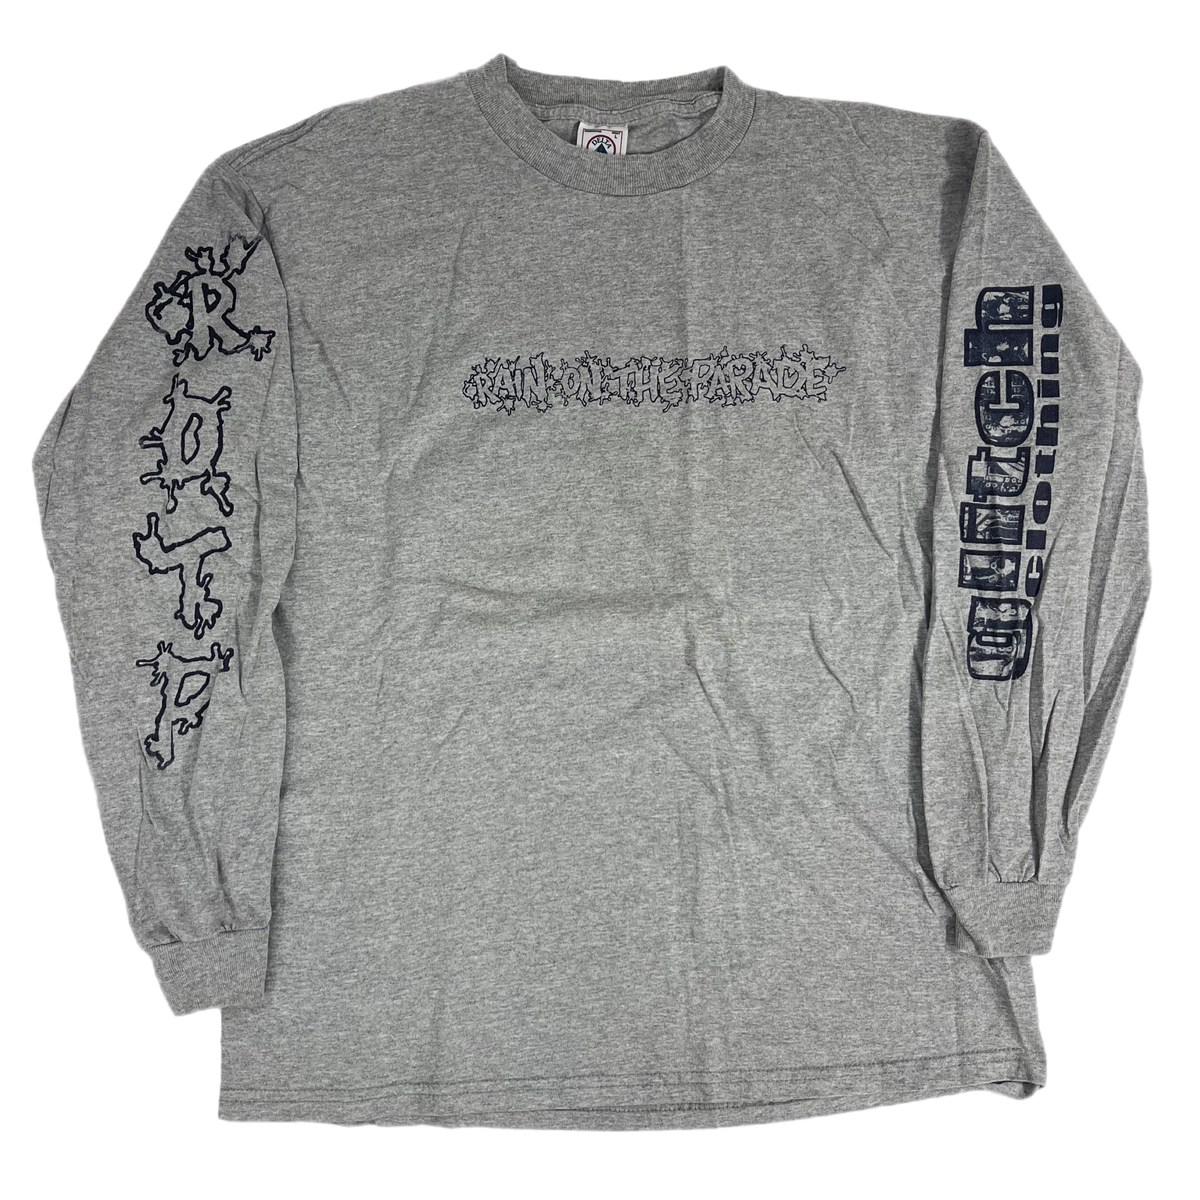 Vintage Rain On The Parade &quot;Glitch Clothing&quot; Long Sleeve Shirt